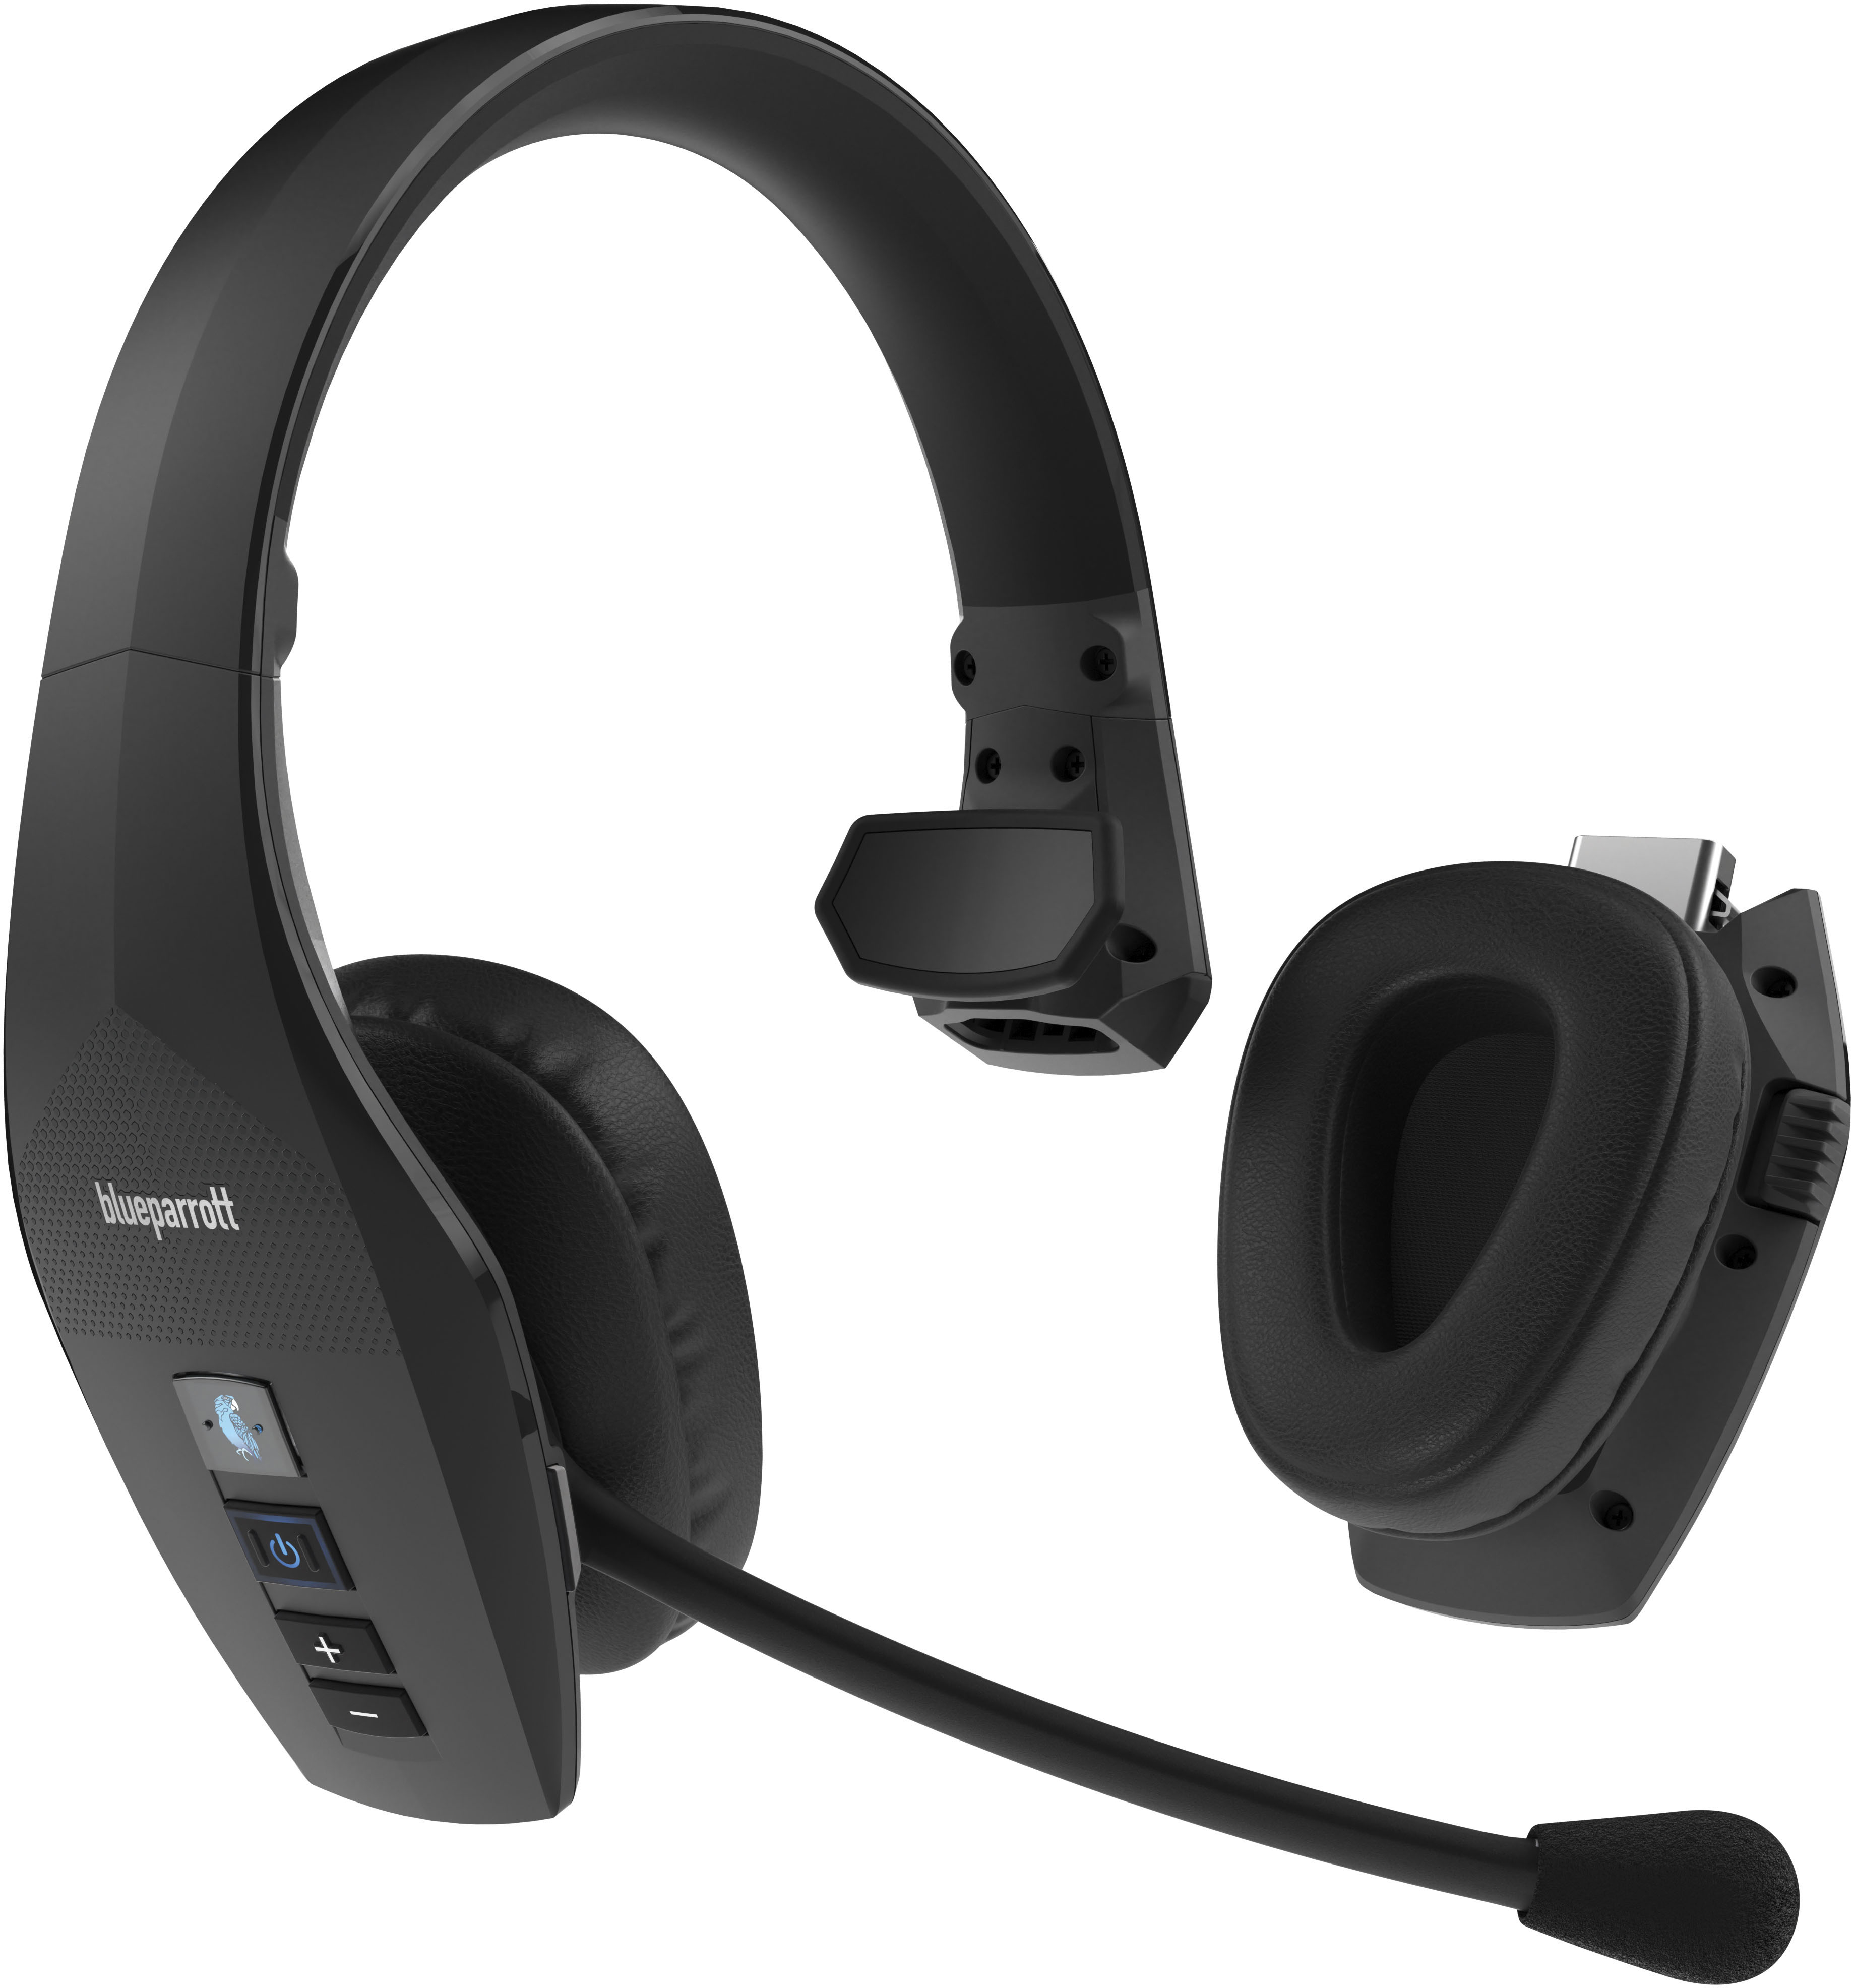 BlueParrott S650-XT 2-in1 Convertible Wireless Best Buy Active Noise Cancellation Black - with 204292 Headset